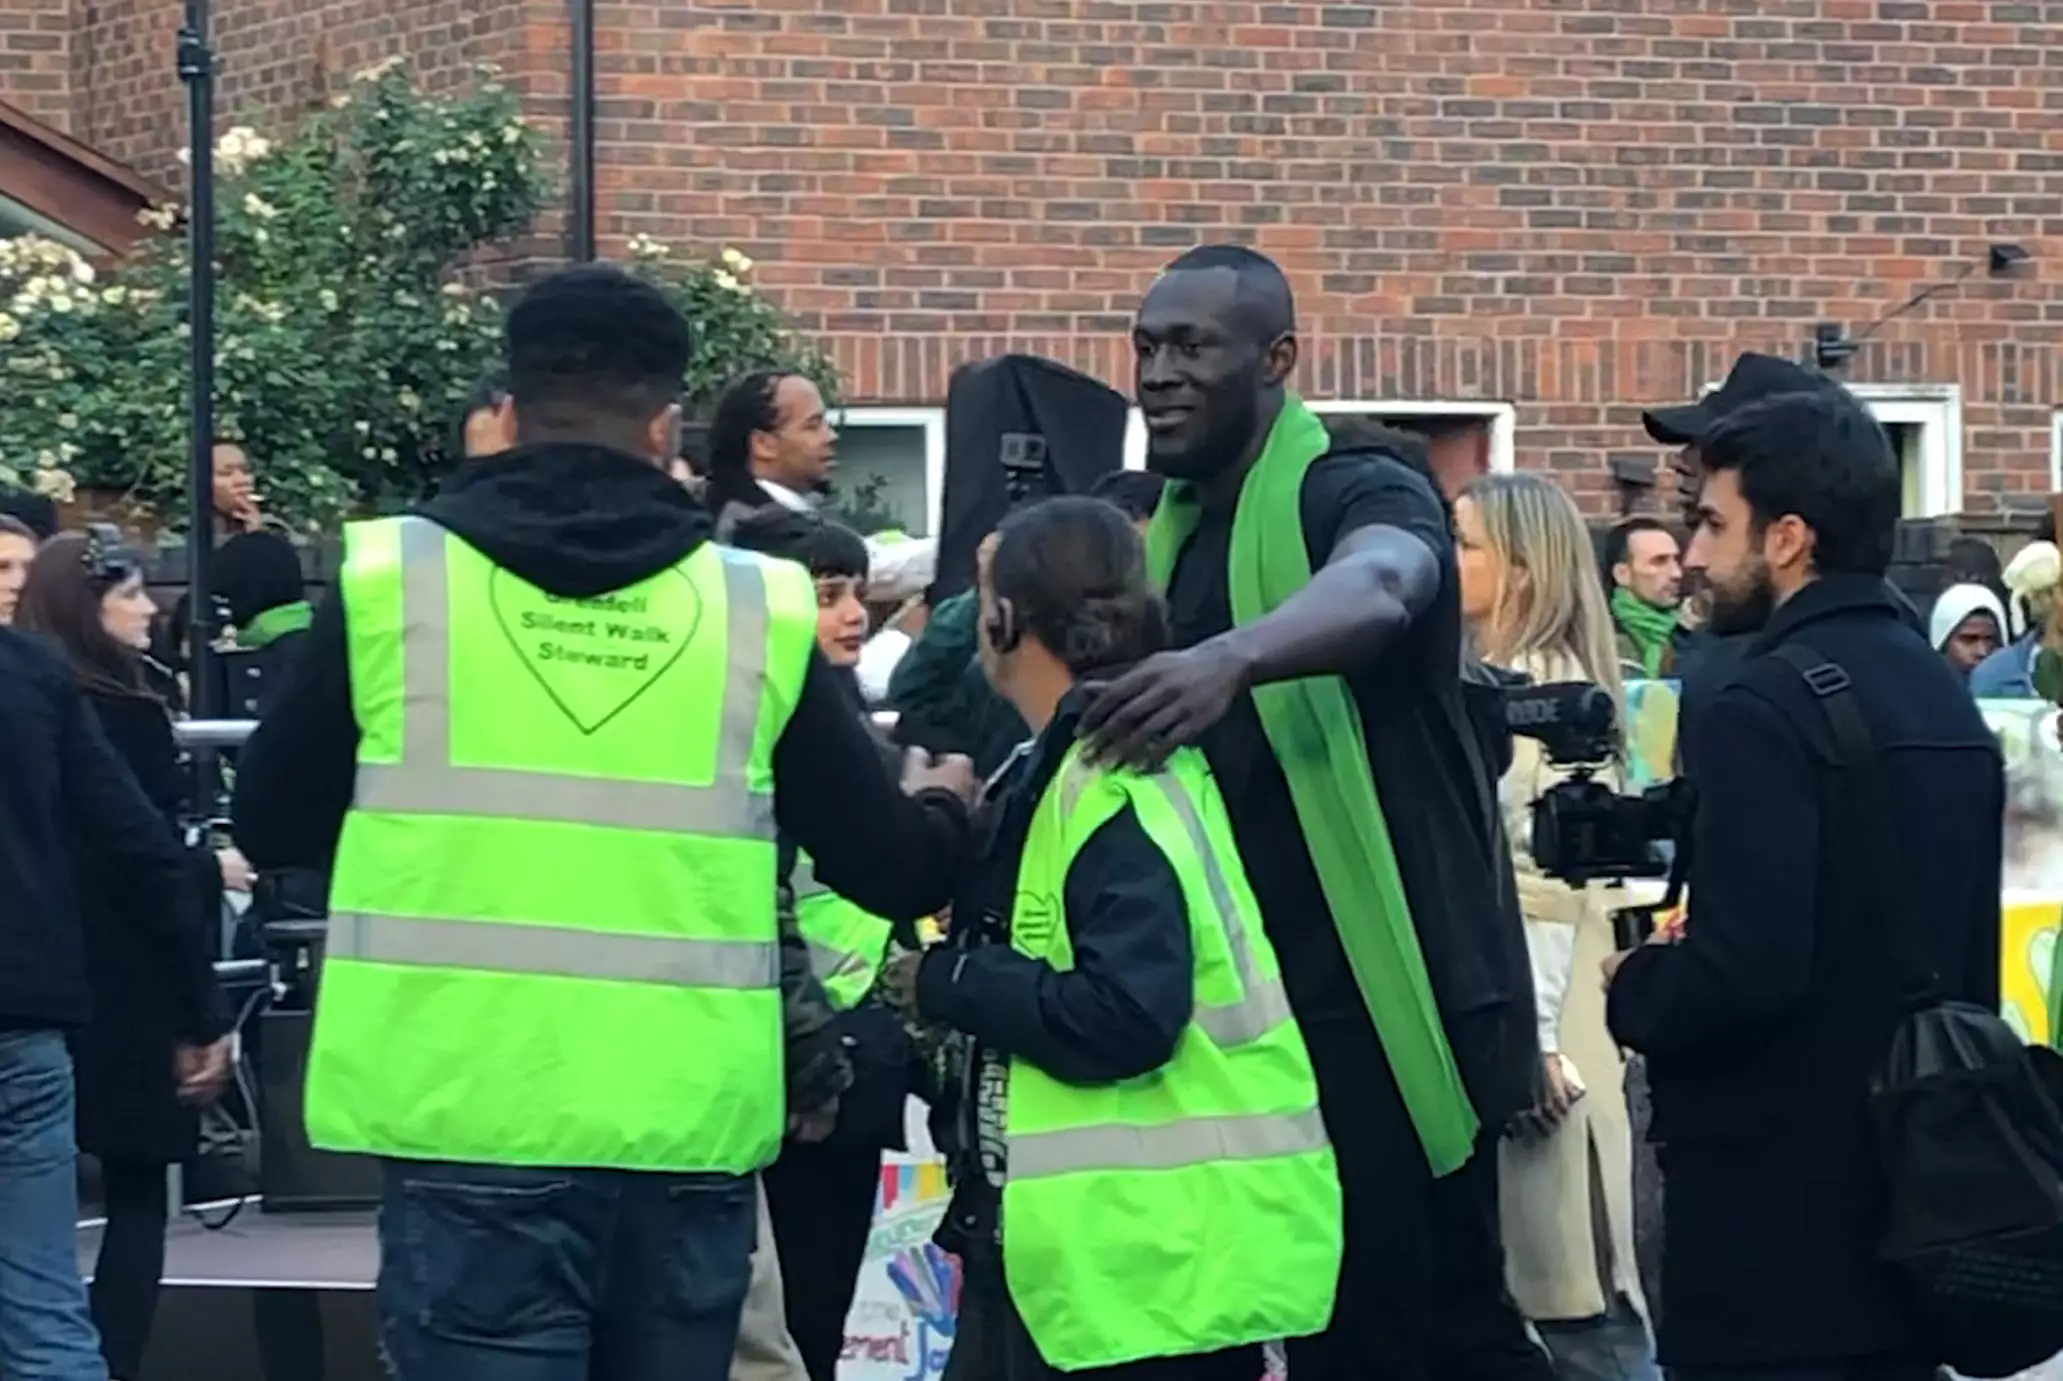 Stormzy met families and friends affected after the tragedy.